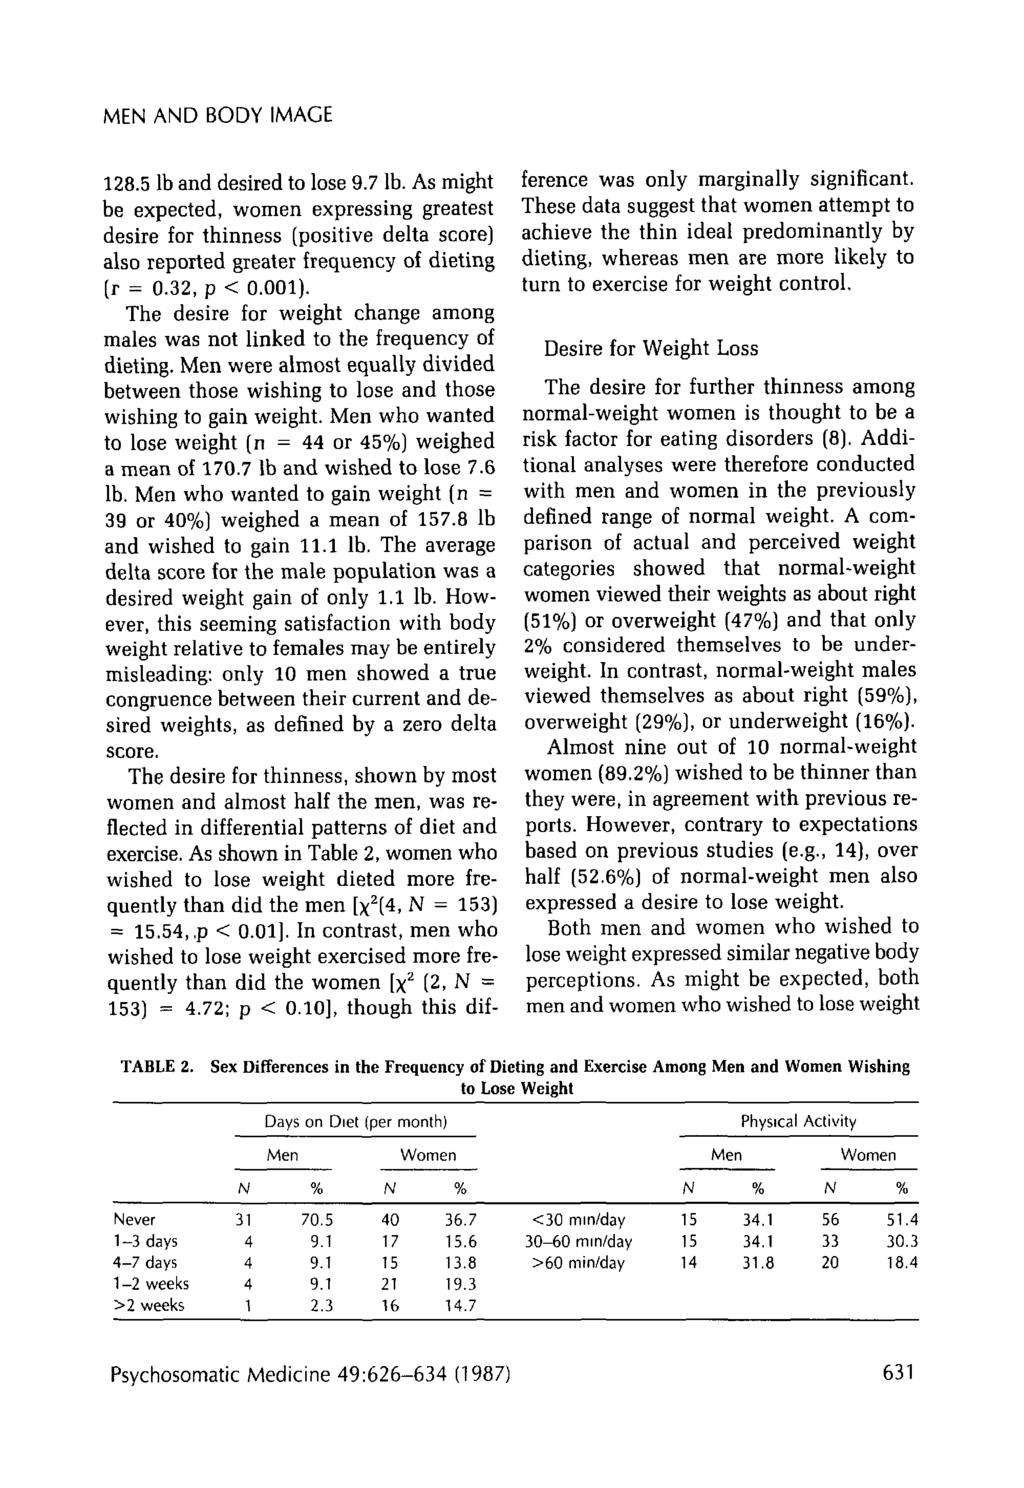 MEN AND BODY IMAGE 128.5 lb and desired to lose 9.7 lb. As might be expected, women expressing greatest desire for thinness (positive delta score) also reported greater frequency of dieting (r = 0.